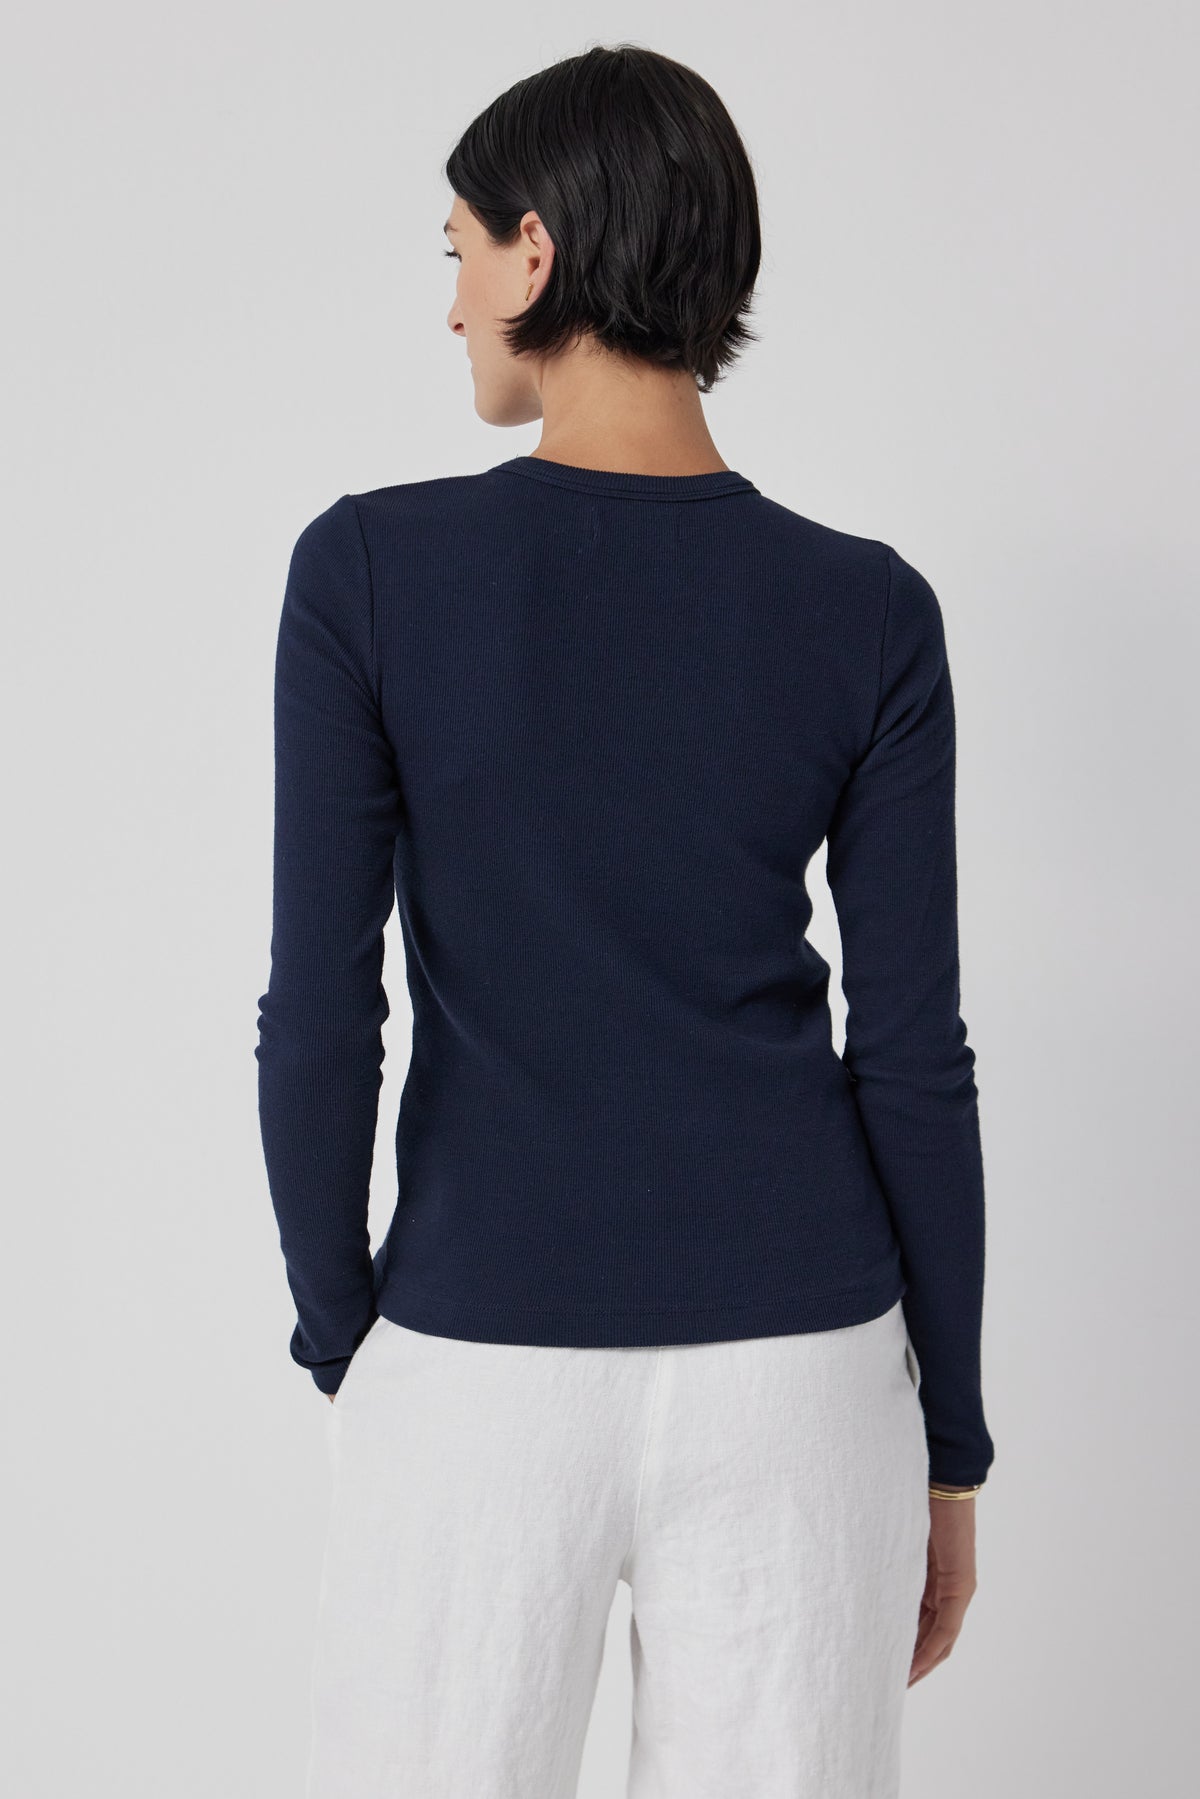 A woman seen from behind wearing a navy blue long-sleeve, slim-fit Velvet by Jenny Graham CAMINO TEE and white pants.-36463422046401